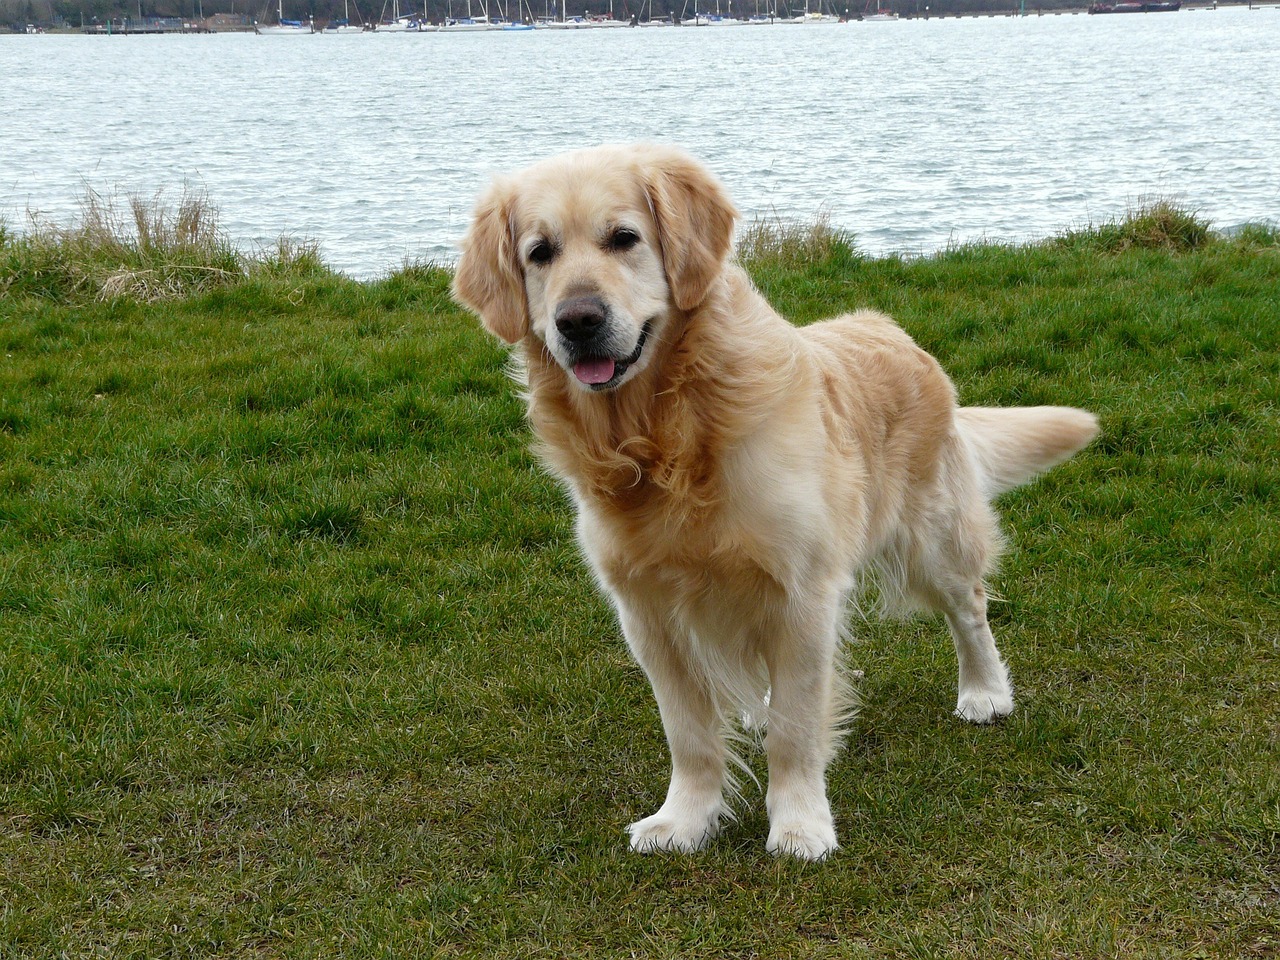 What does a golden retriever look like?